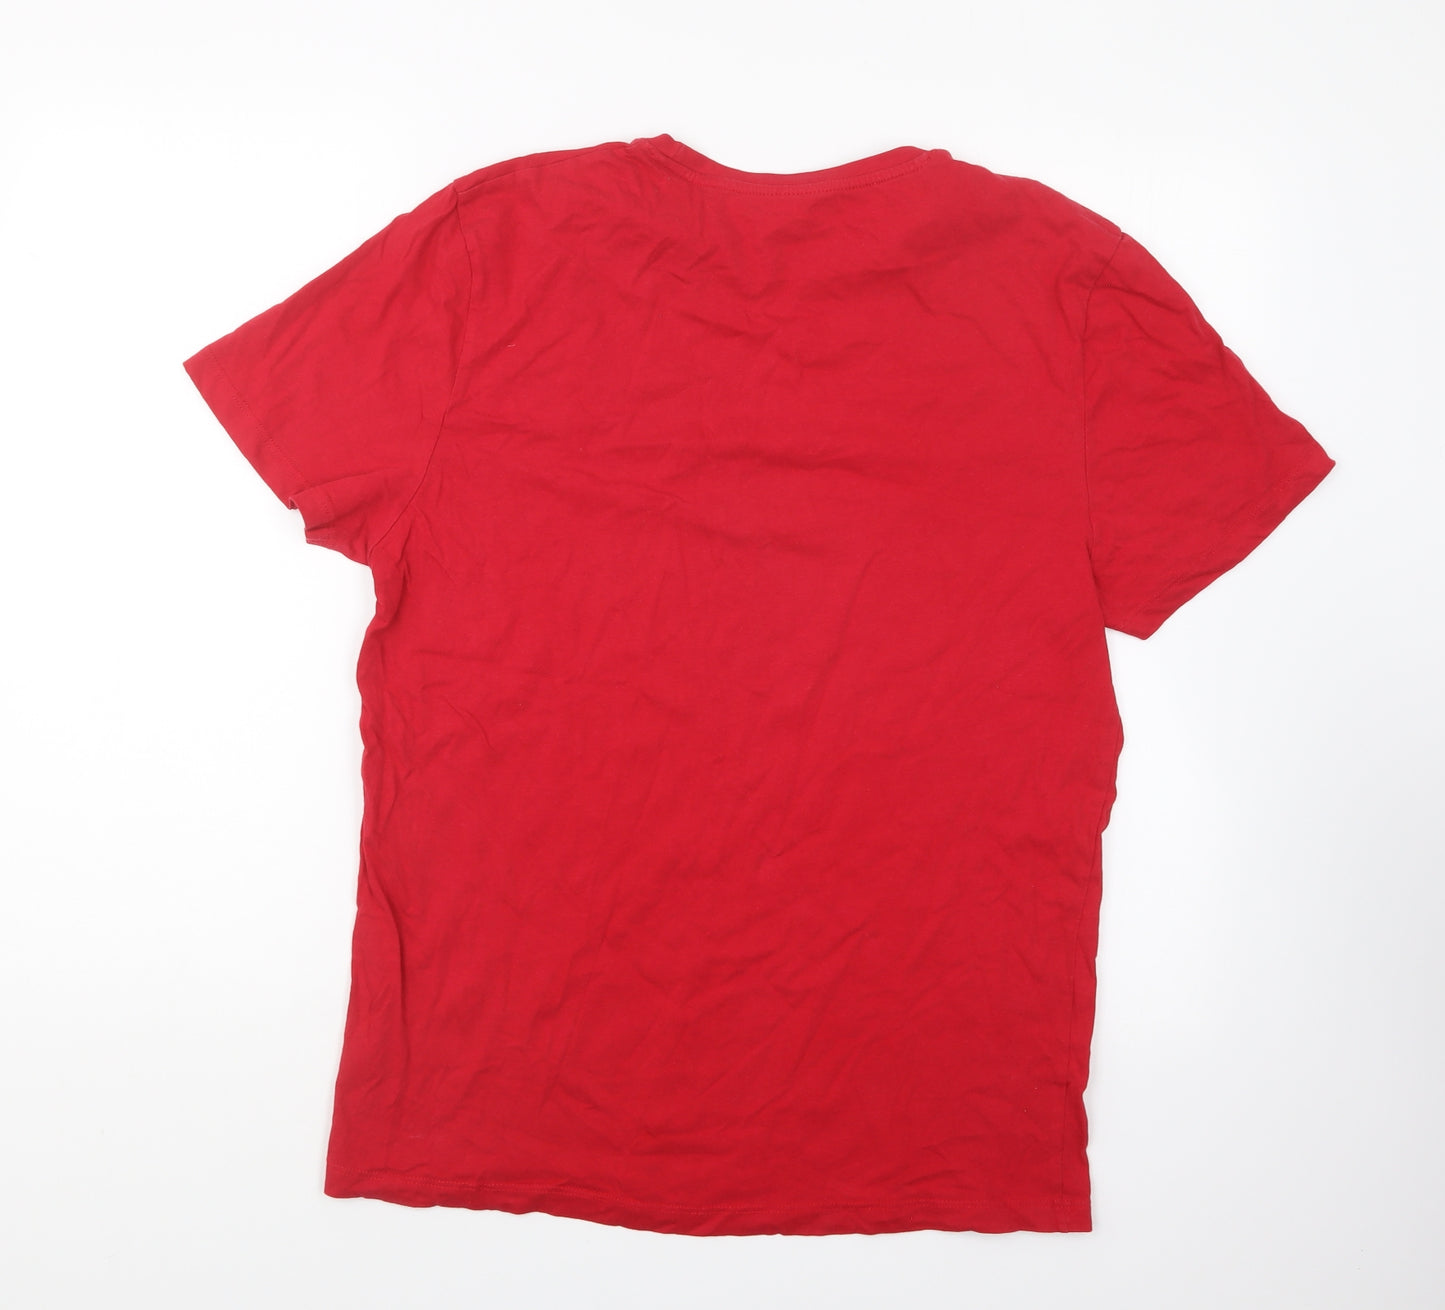 Primark Mens Red Cotton T-Shirt Size L Round Neck - Moving Forward Never Look Back